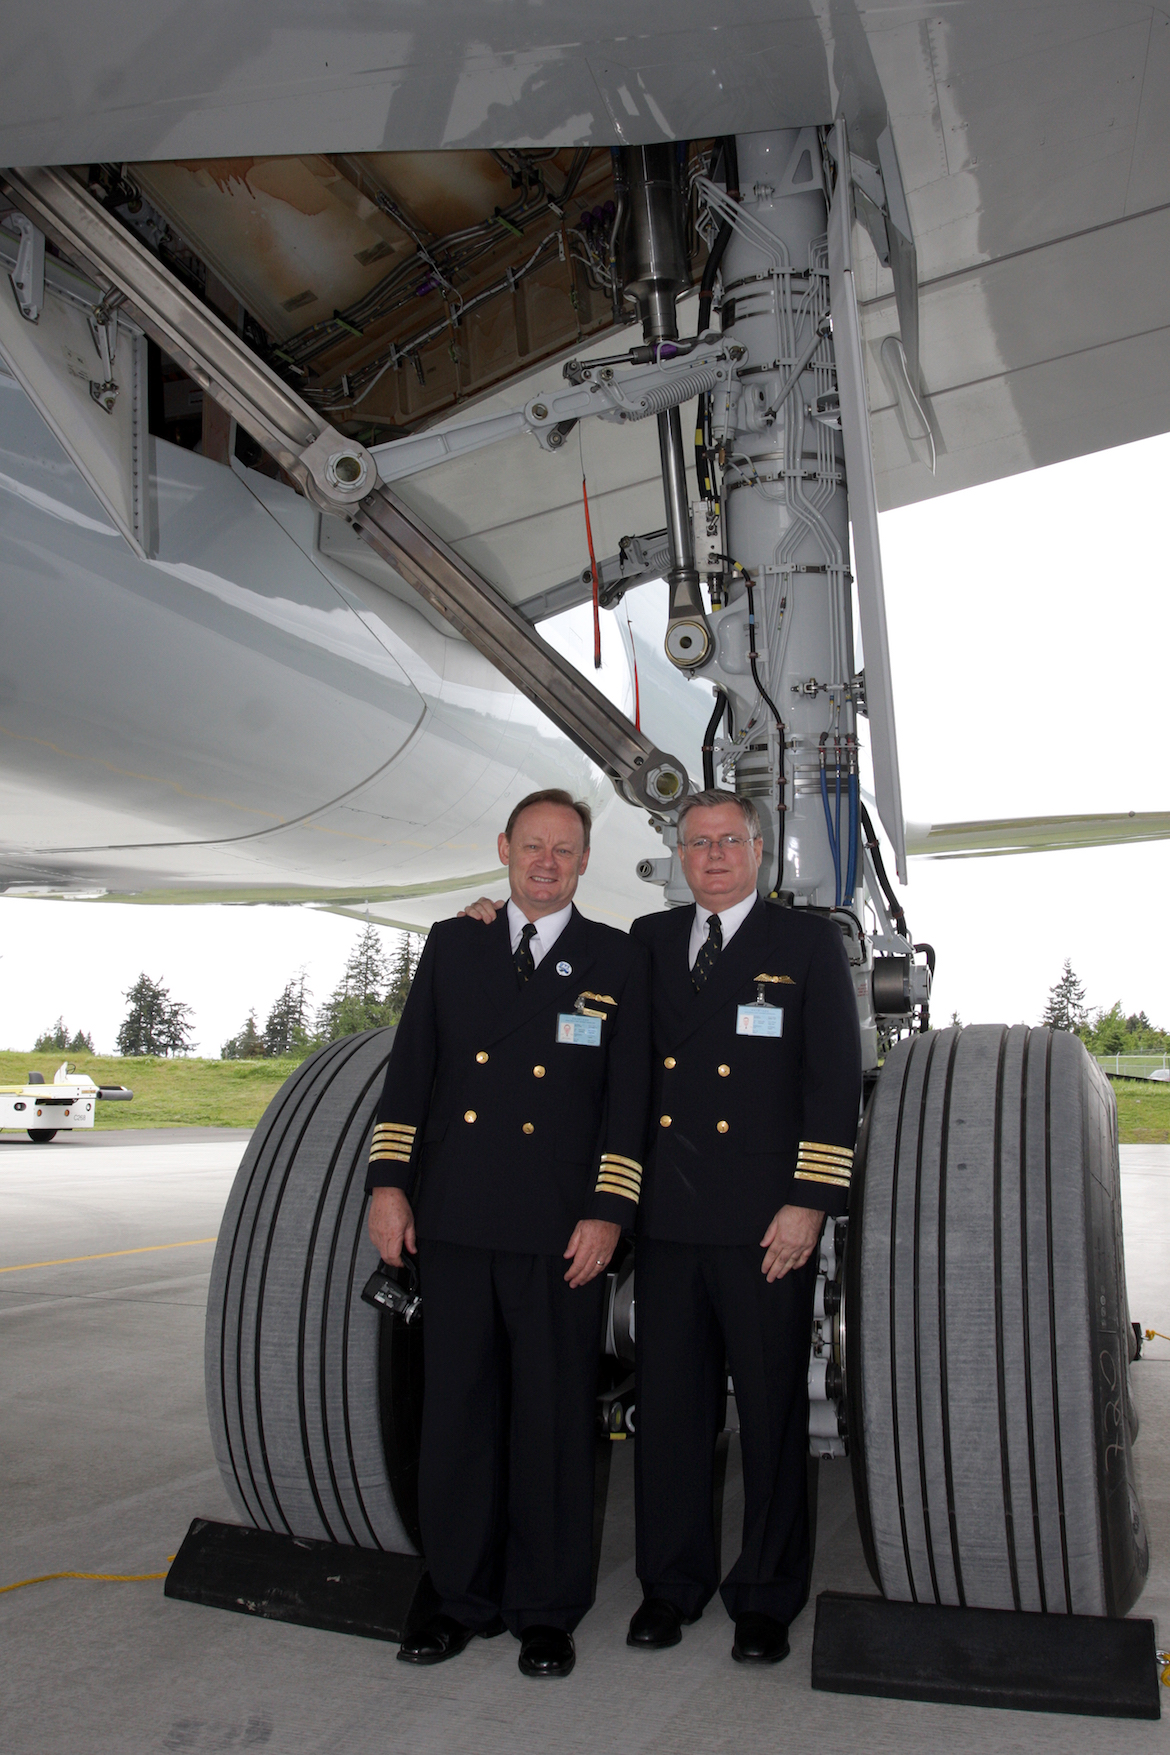 The delivery flight’s Captain Bill Seymour and Captain John Wootton. (Andrew McLaughlin)